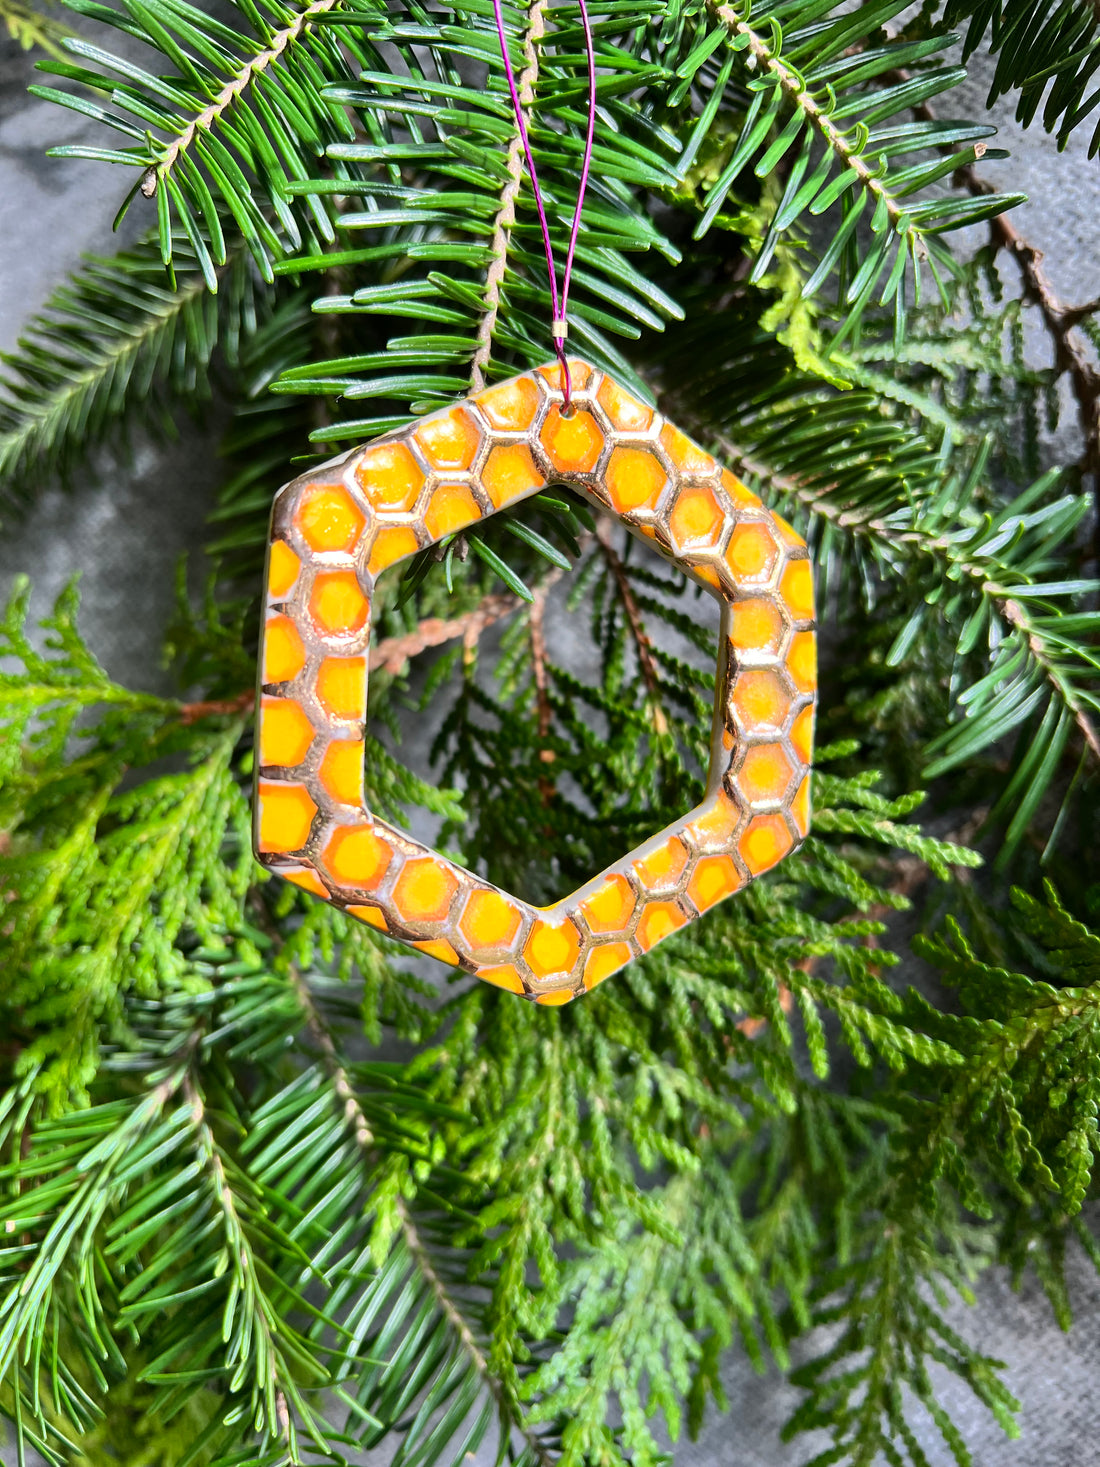 A yellow, orange, and gold open hexagon with a textured honeycomb surface ornament hangs in front of cedar and balsam branches.